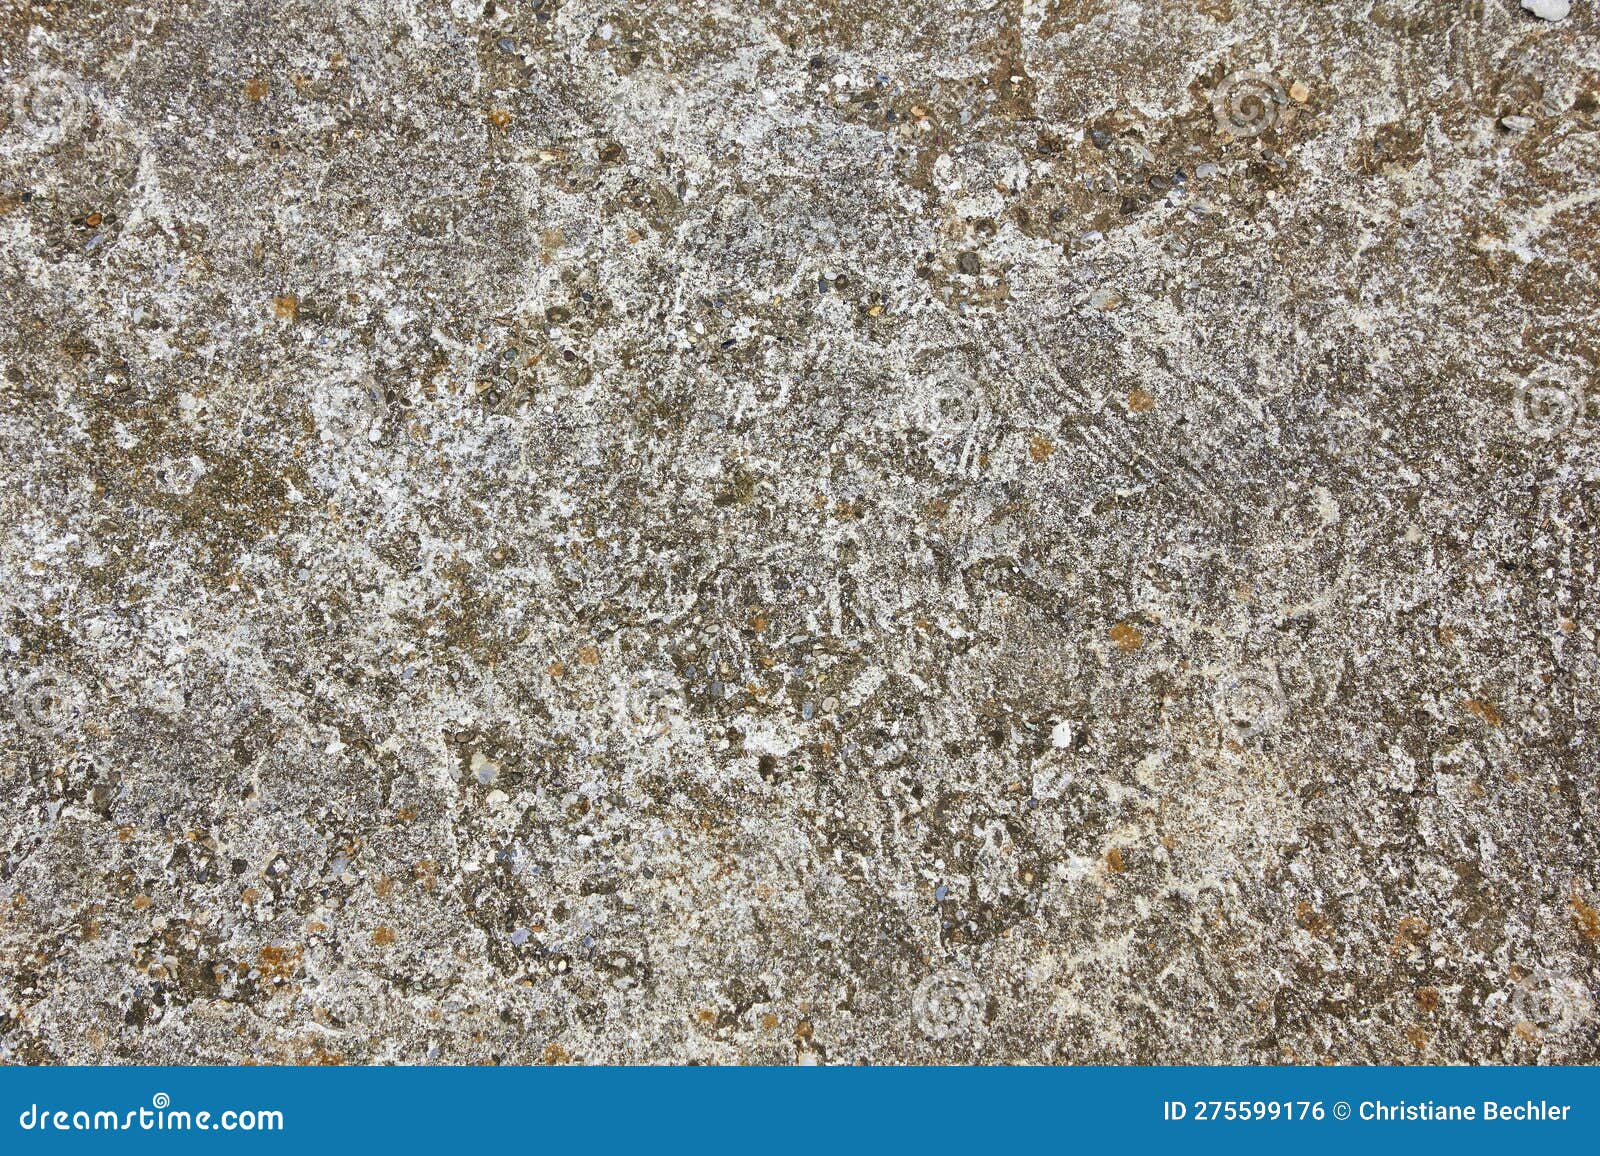 Worn Out Patchy Cement Floor Outdoors Stock Photo - Image of background ...